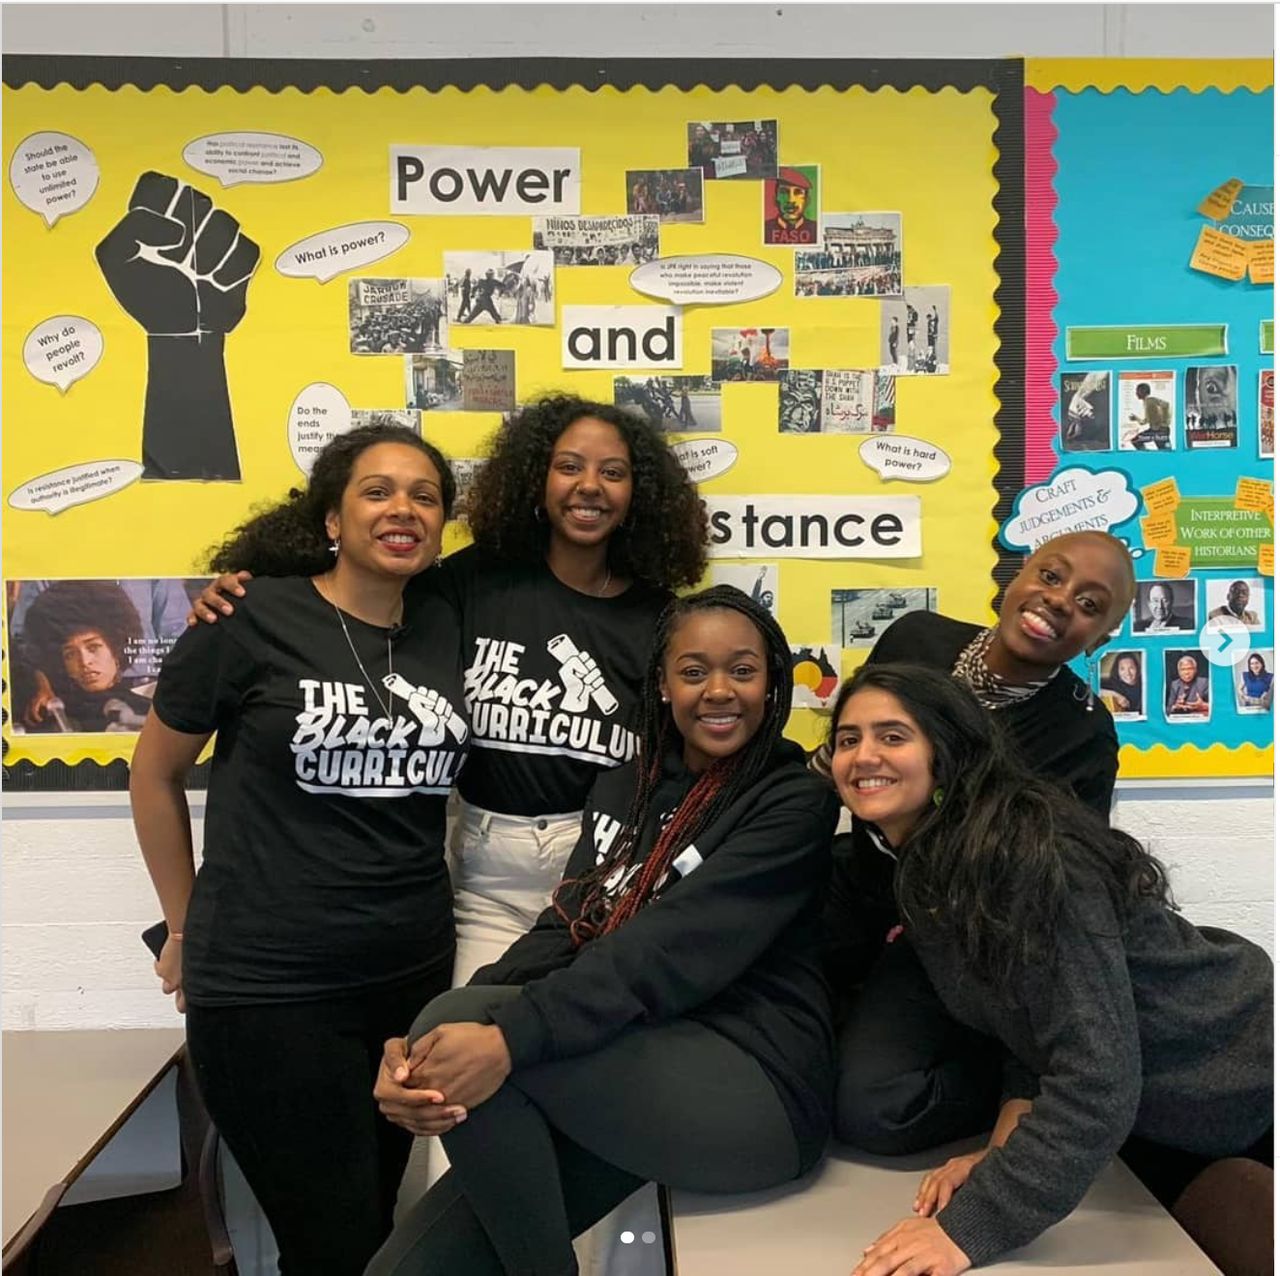 Activists from the initiative The Black Curriculum